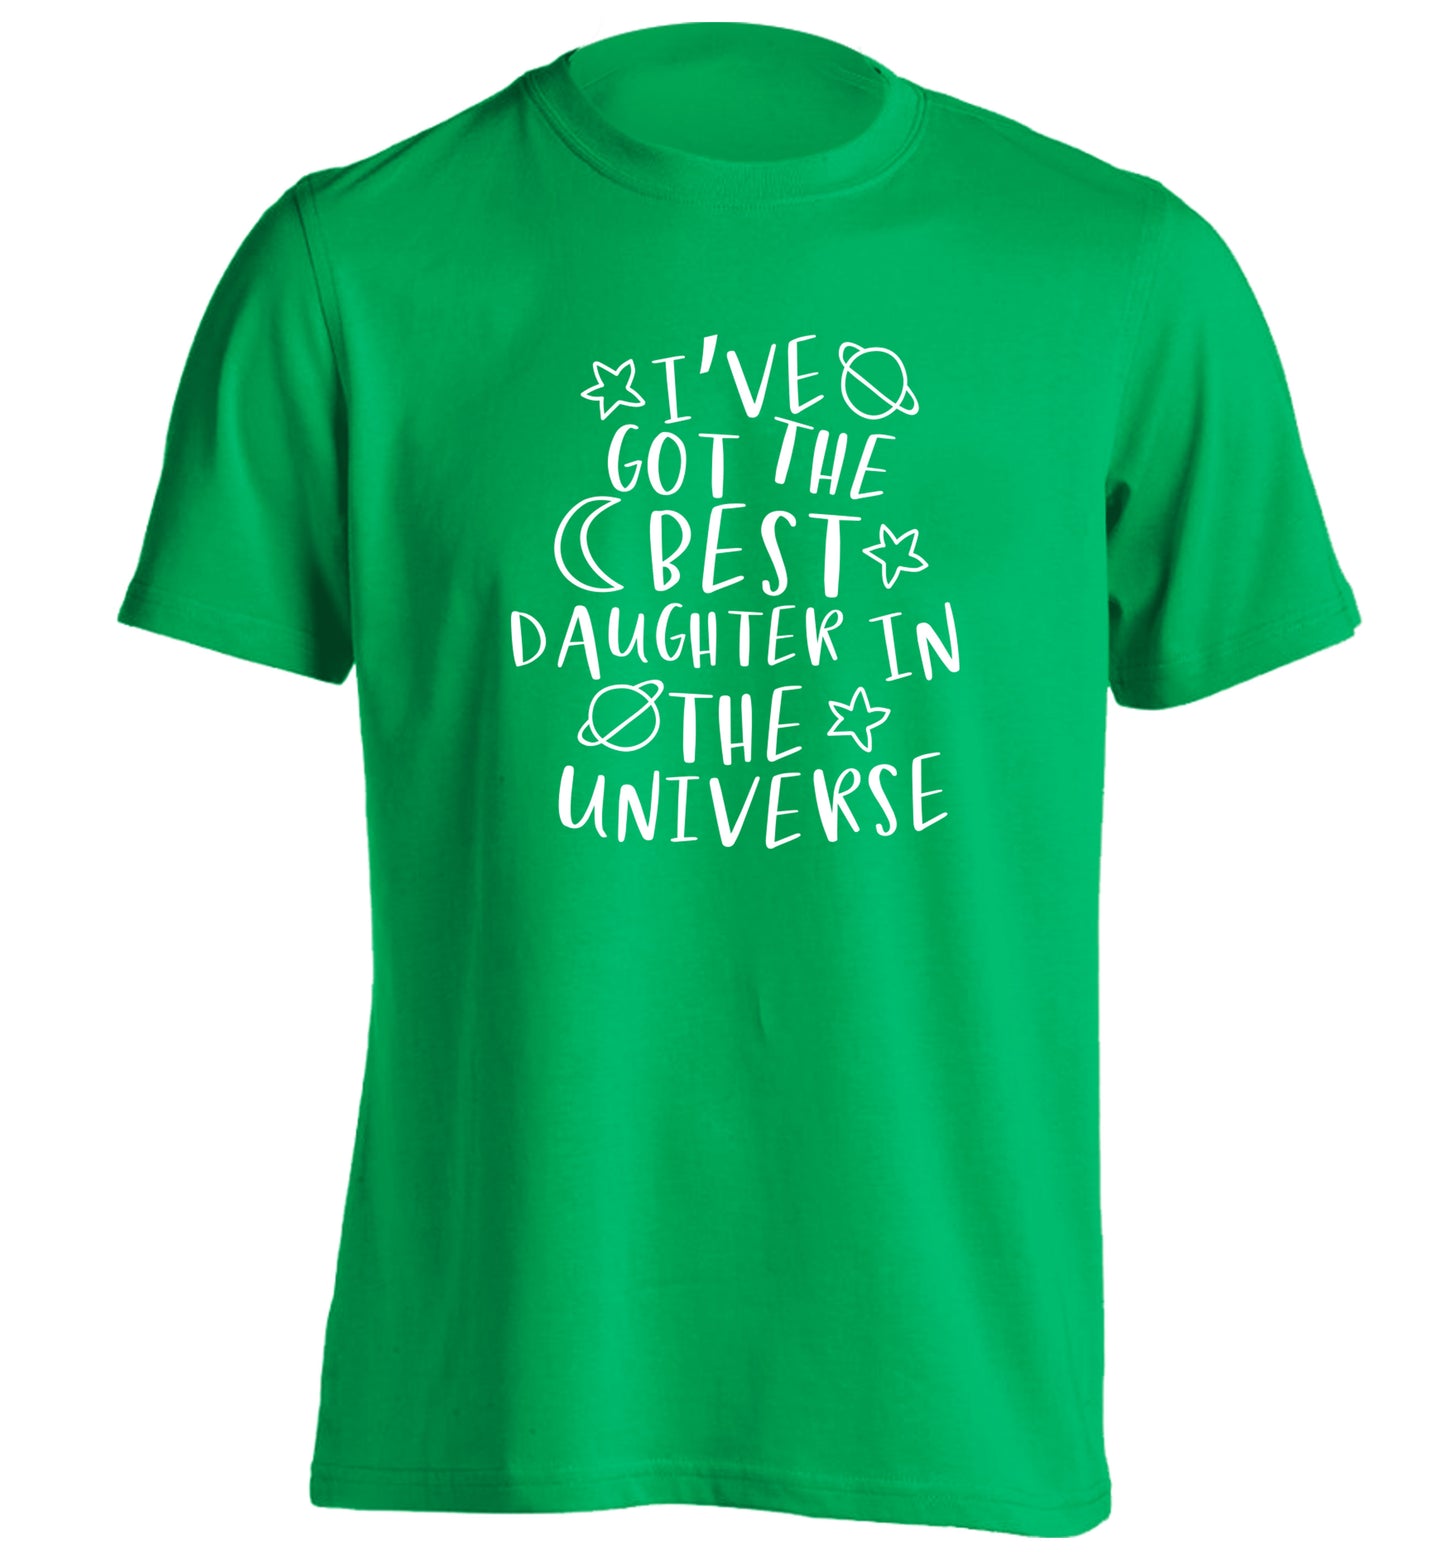 I've got the best daughter in the universe adults unisex green Tshirt 2XL